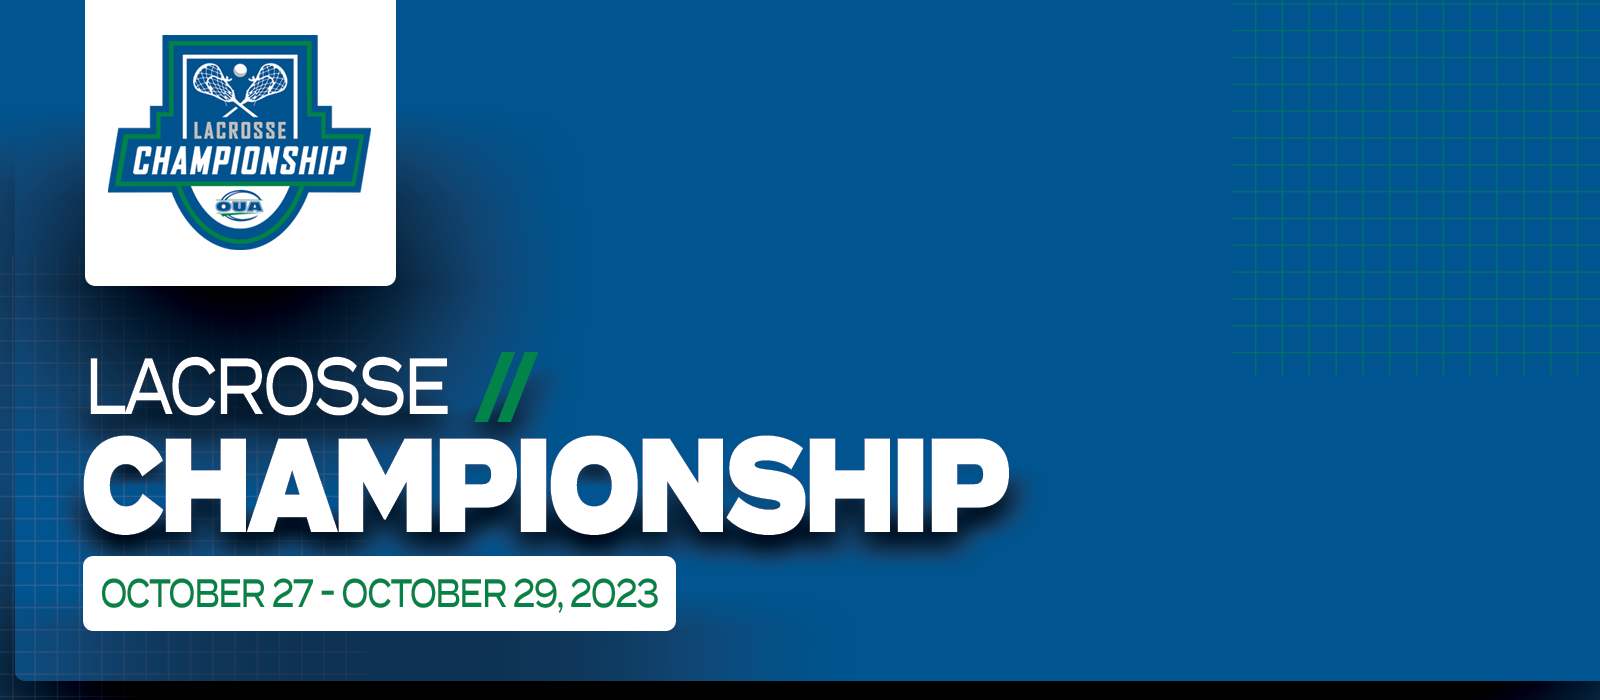 Predominantly blue graphic with large white text on the left side that reads Lacrosse Championship, October 27 - October 29, 2023’ beneath the OUA Lacrosse Championship logo